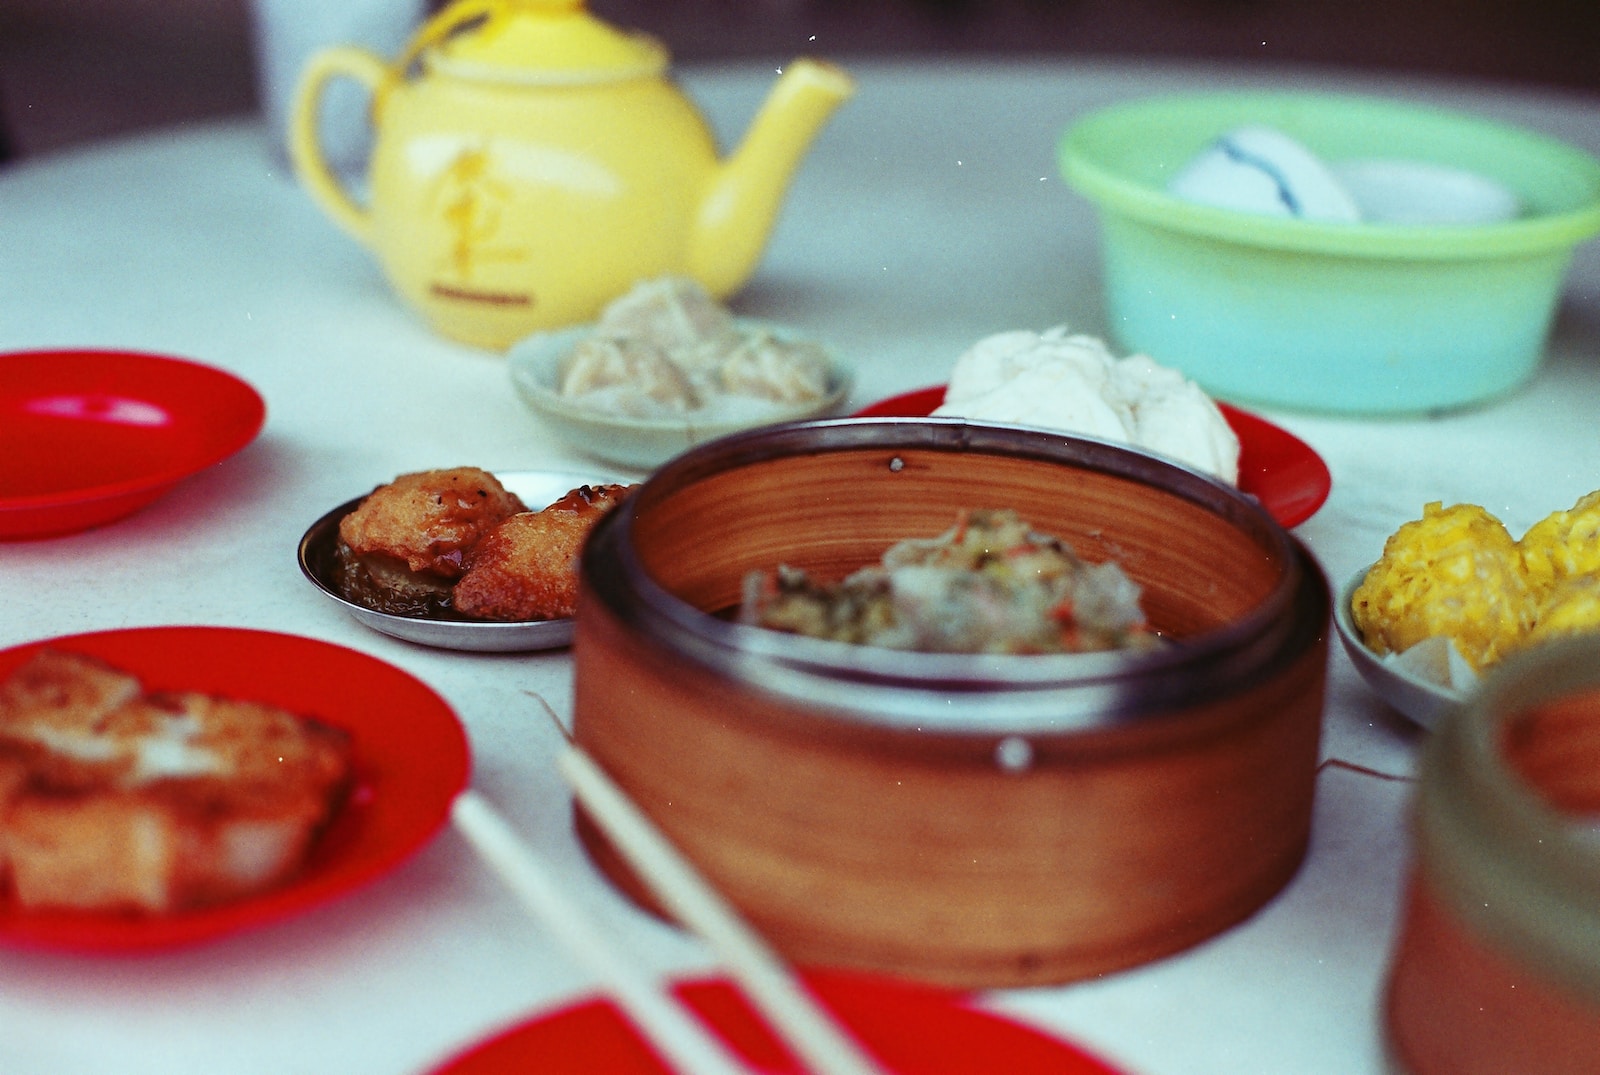 Dim Sum Ritual cooked foods on brown bowls and saucers